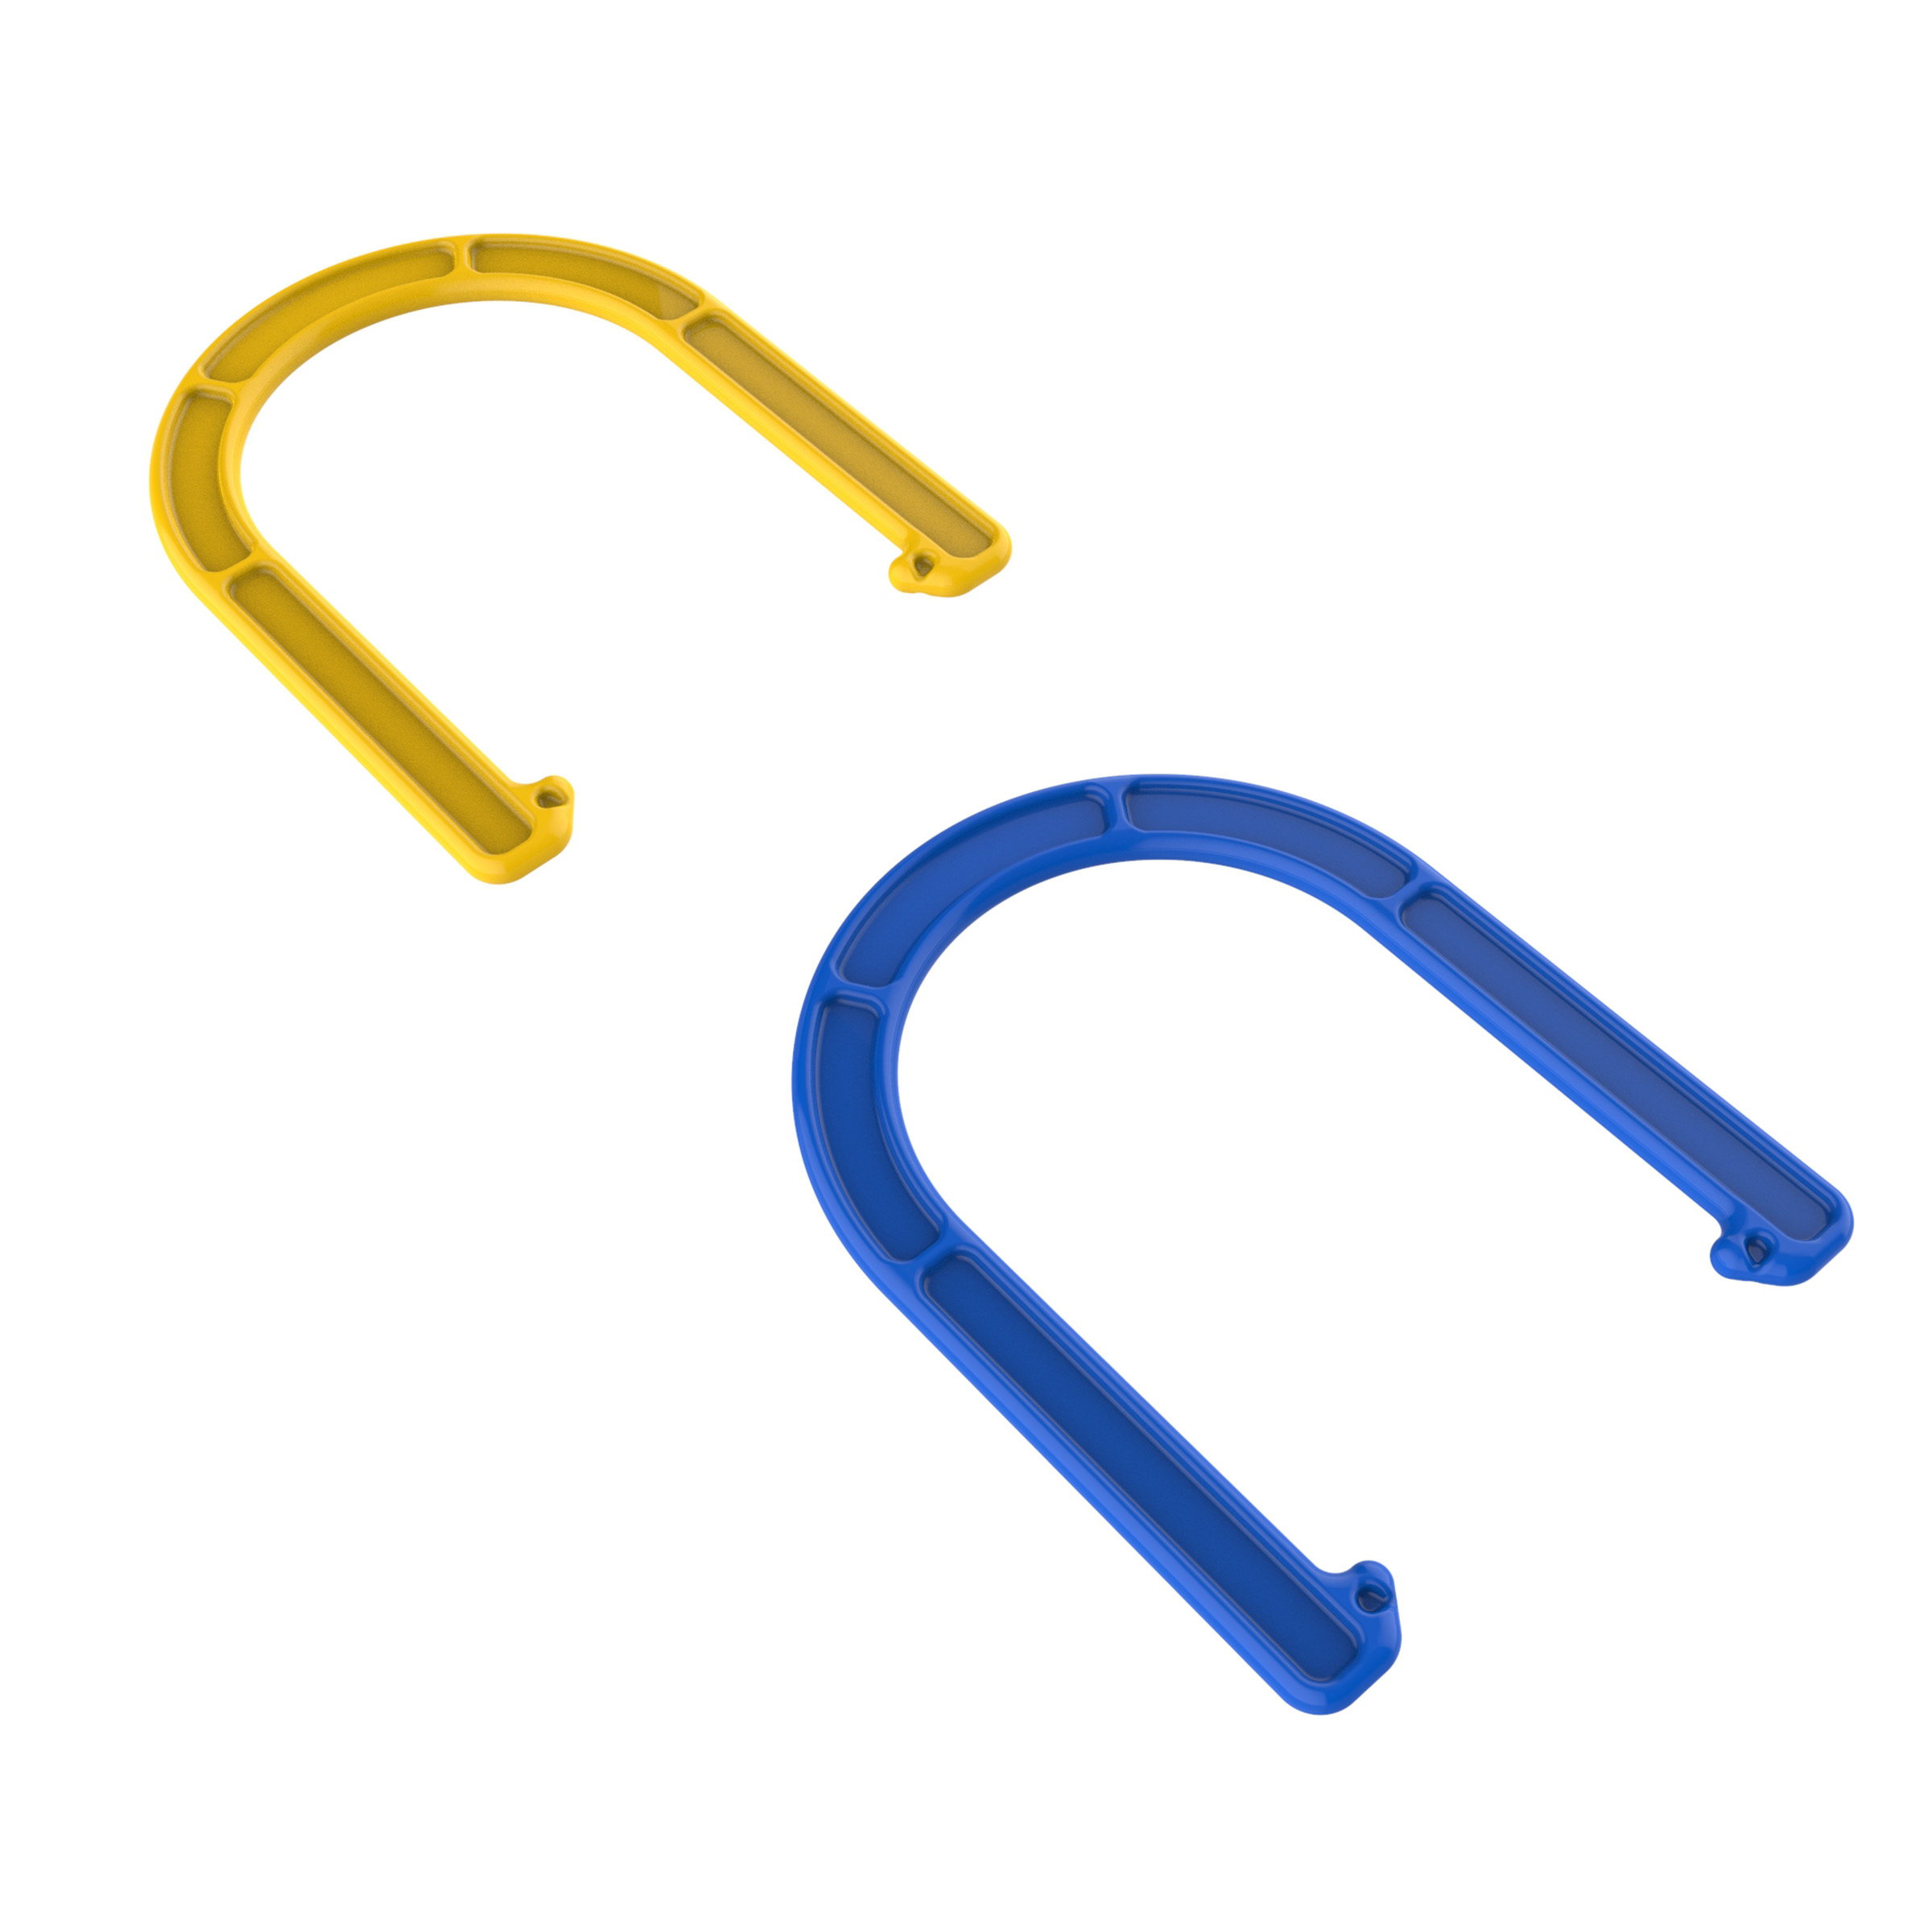 2-in-1 Horseshoe and Ring Toss – Outdoor Combo Two-Player Skill Game Set by Hey! Play! - image 3 of 6